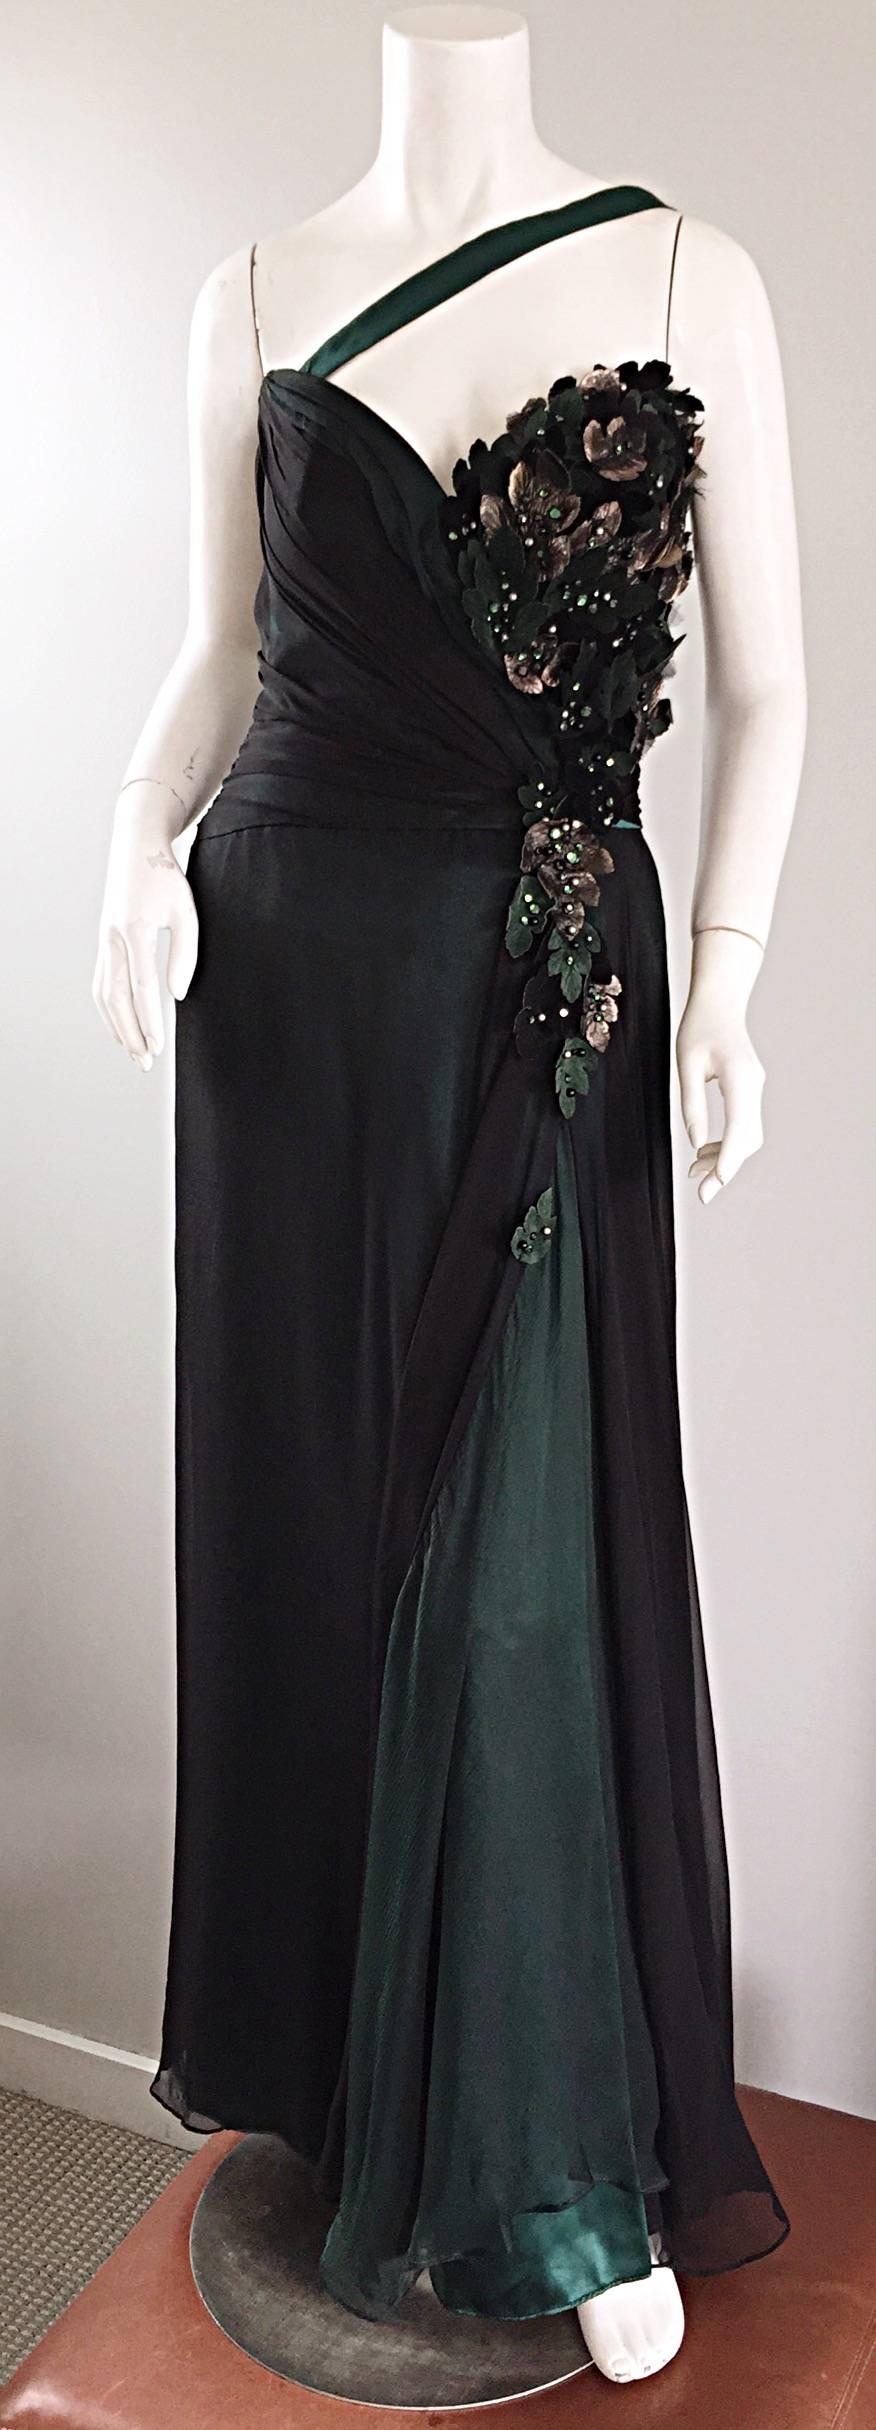 emerald green gown